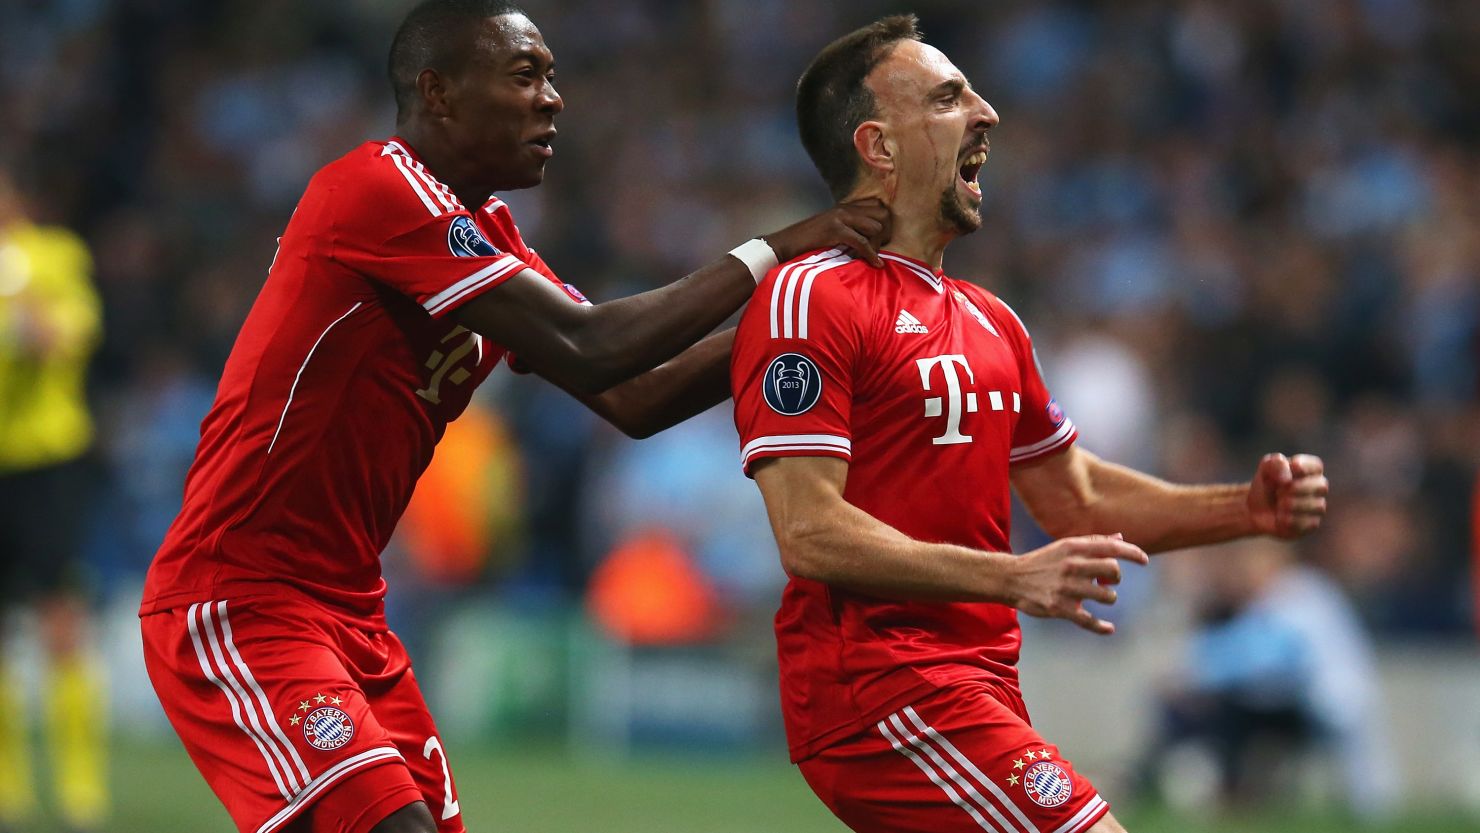 Franck Ribery opened the scoring for Bayern Munich in its victory at Manchester City.